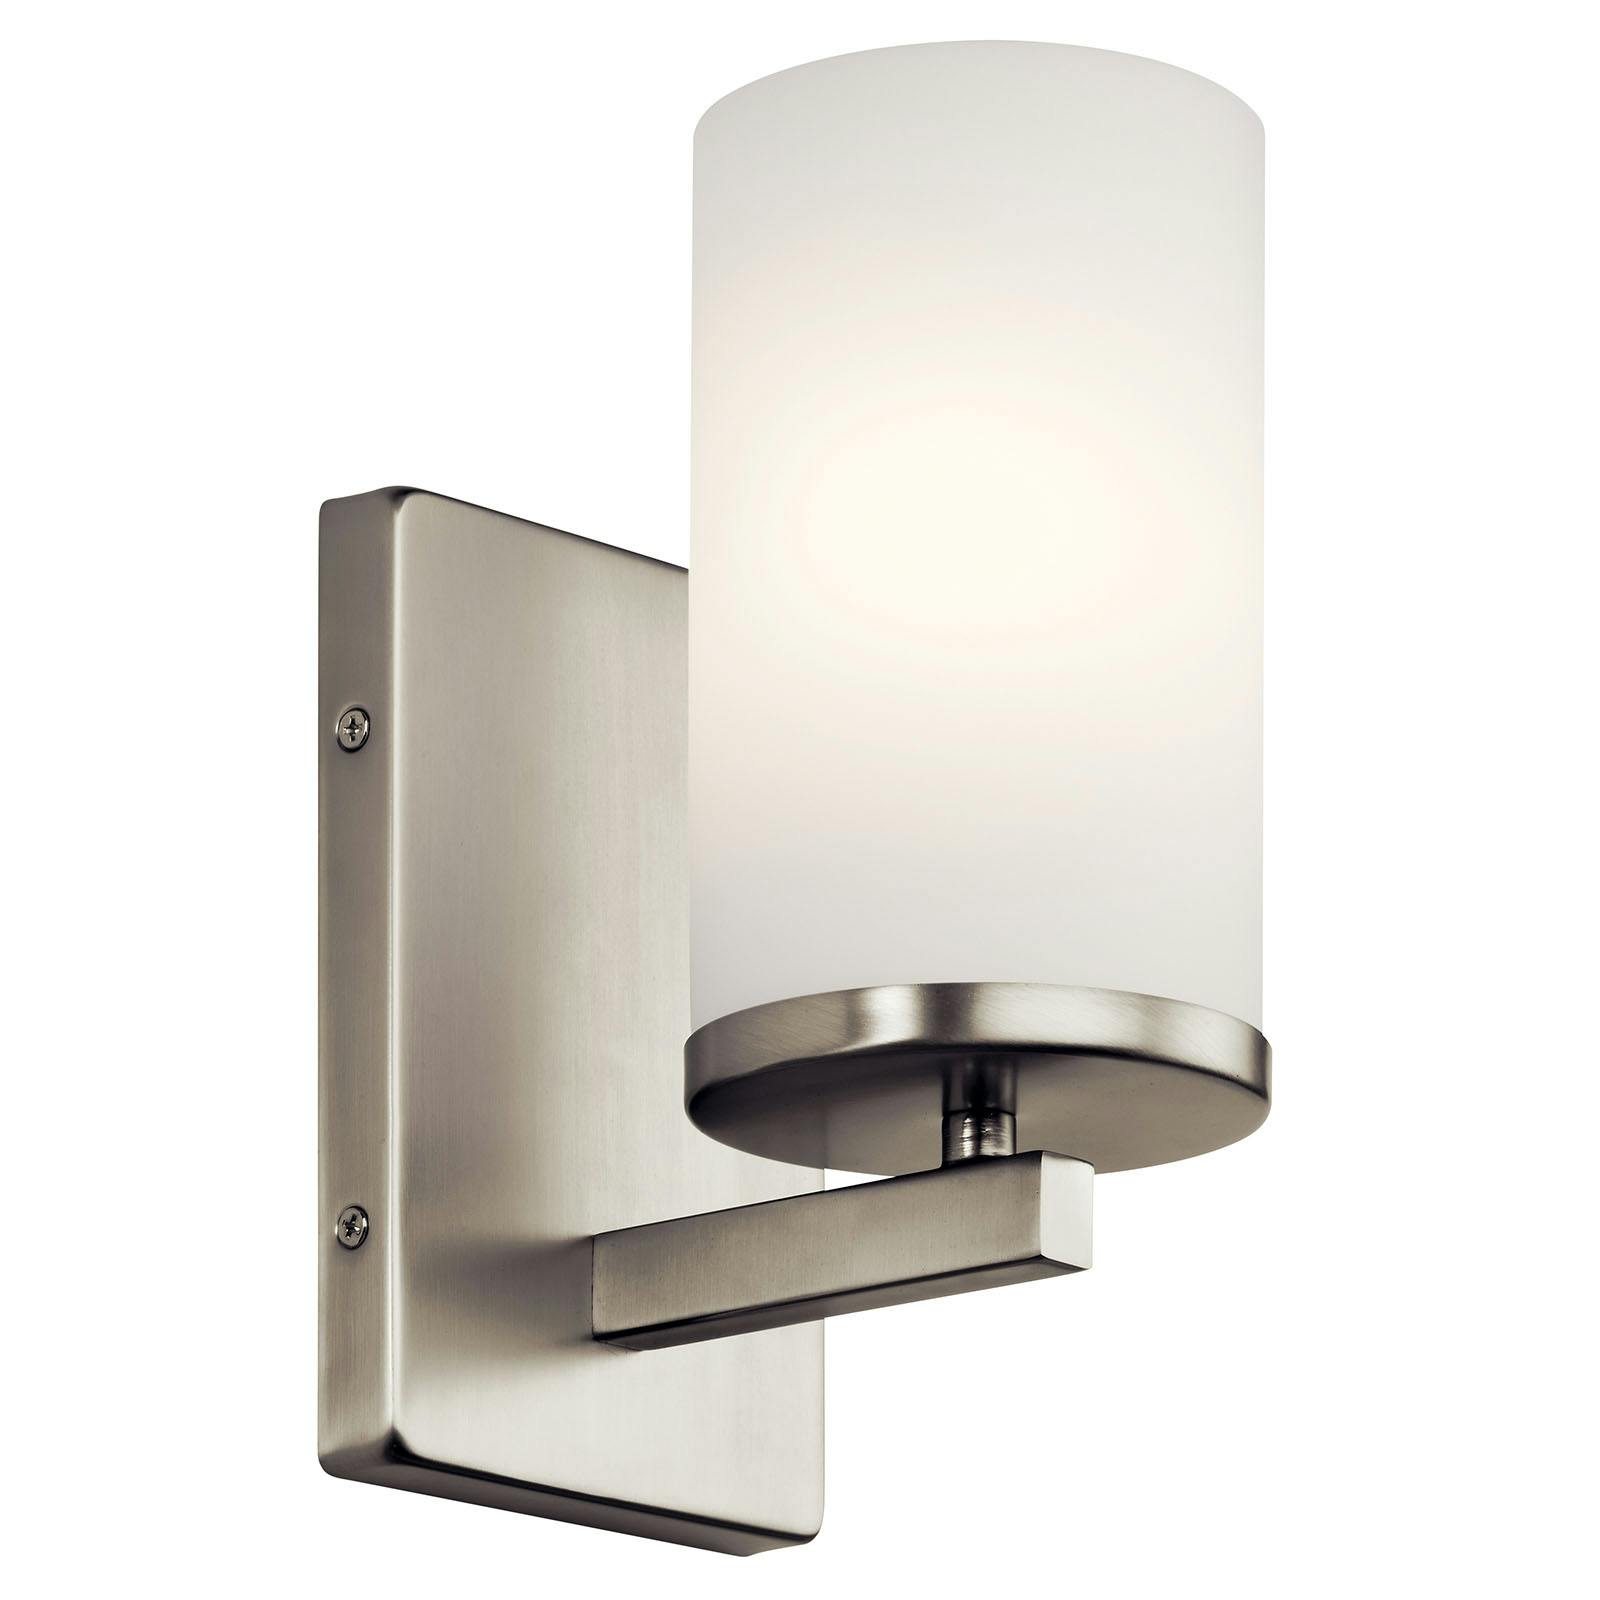 Crosby 1 Light Wall Sconce Nickel on a white background